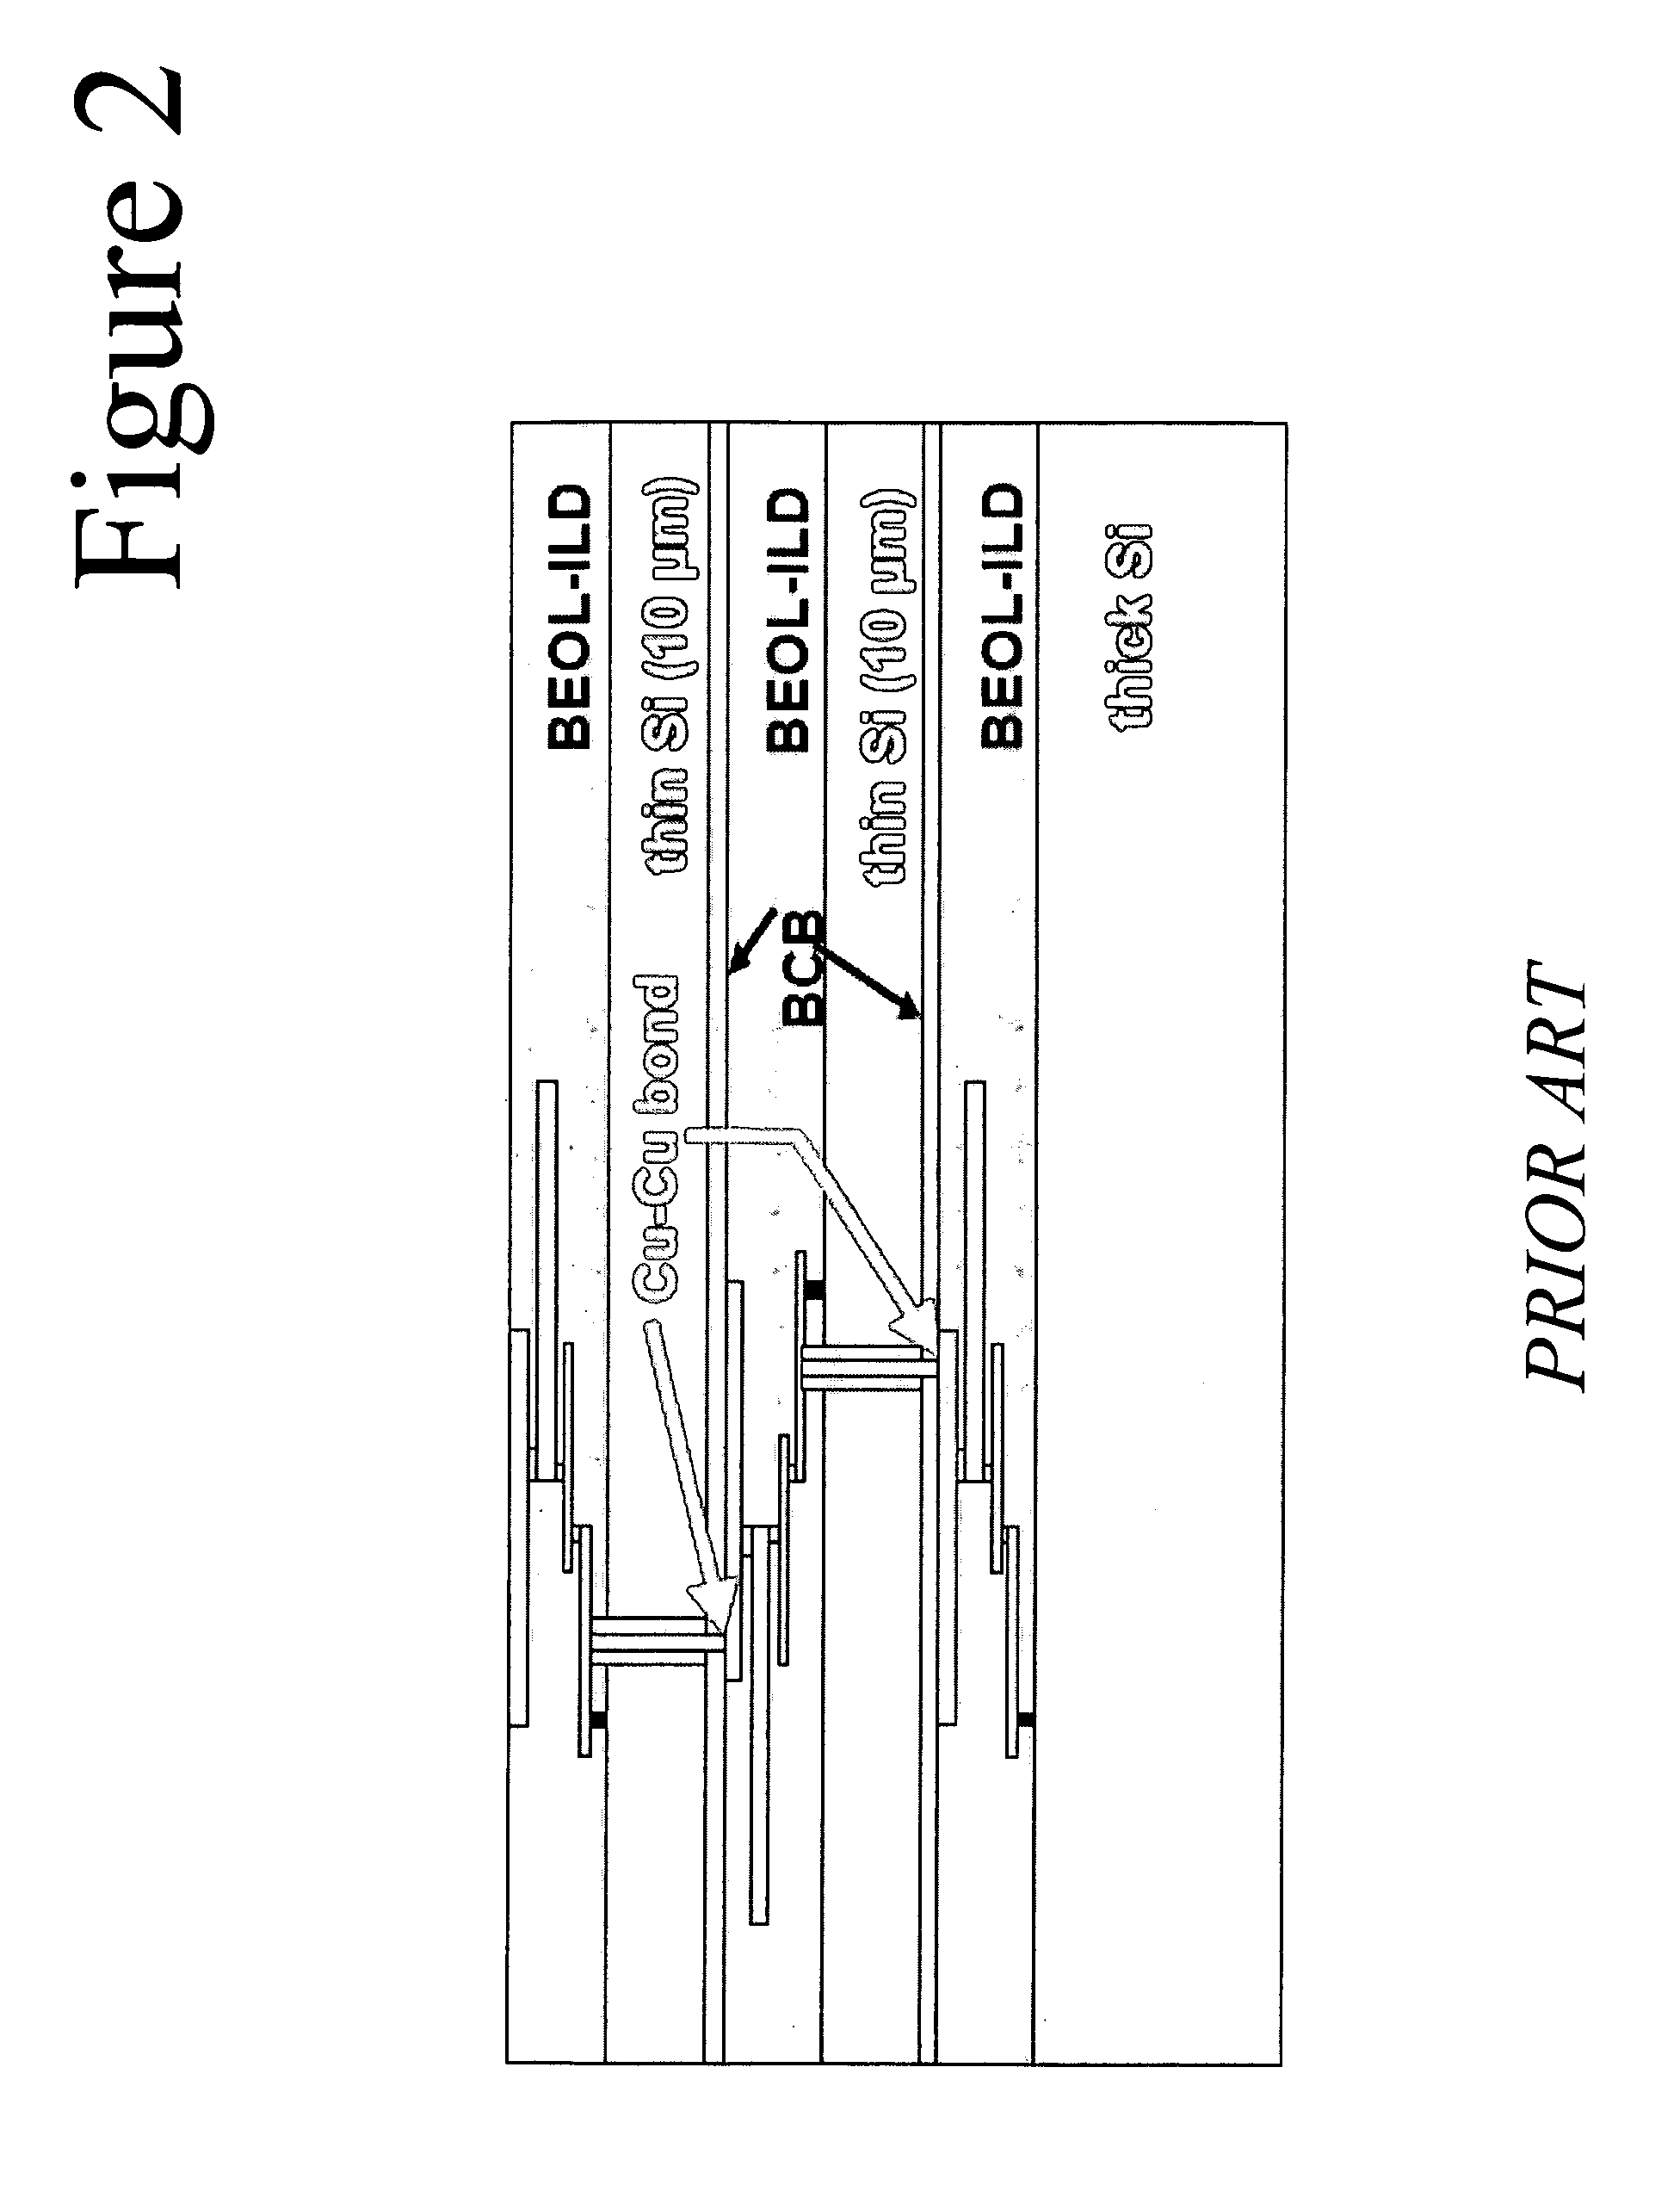 Formation of deep via airgaps for three dimensional wafer to wafer interconnect